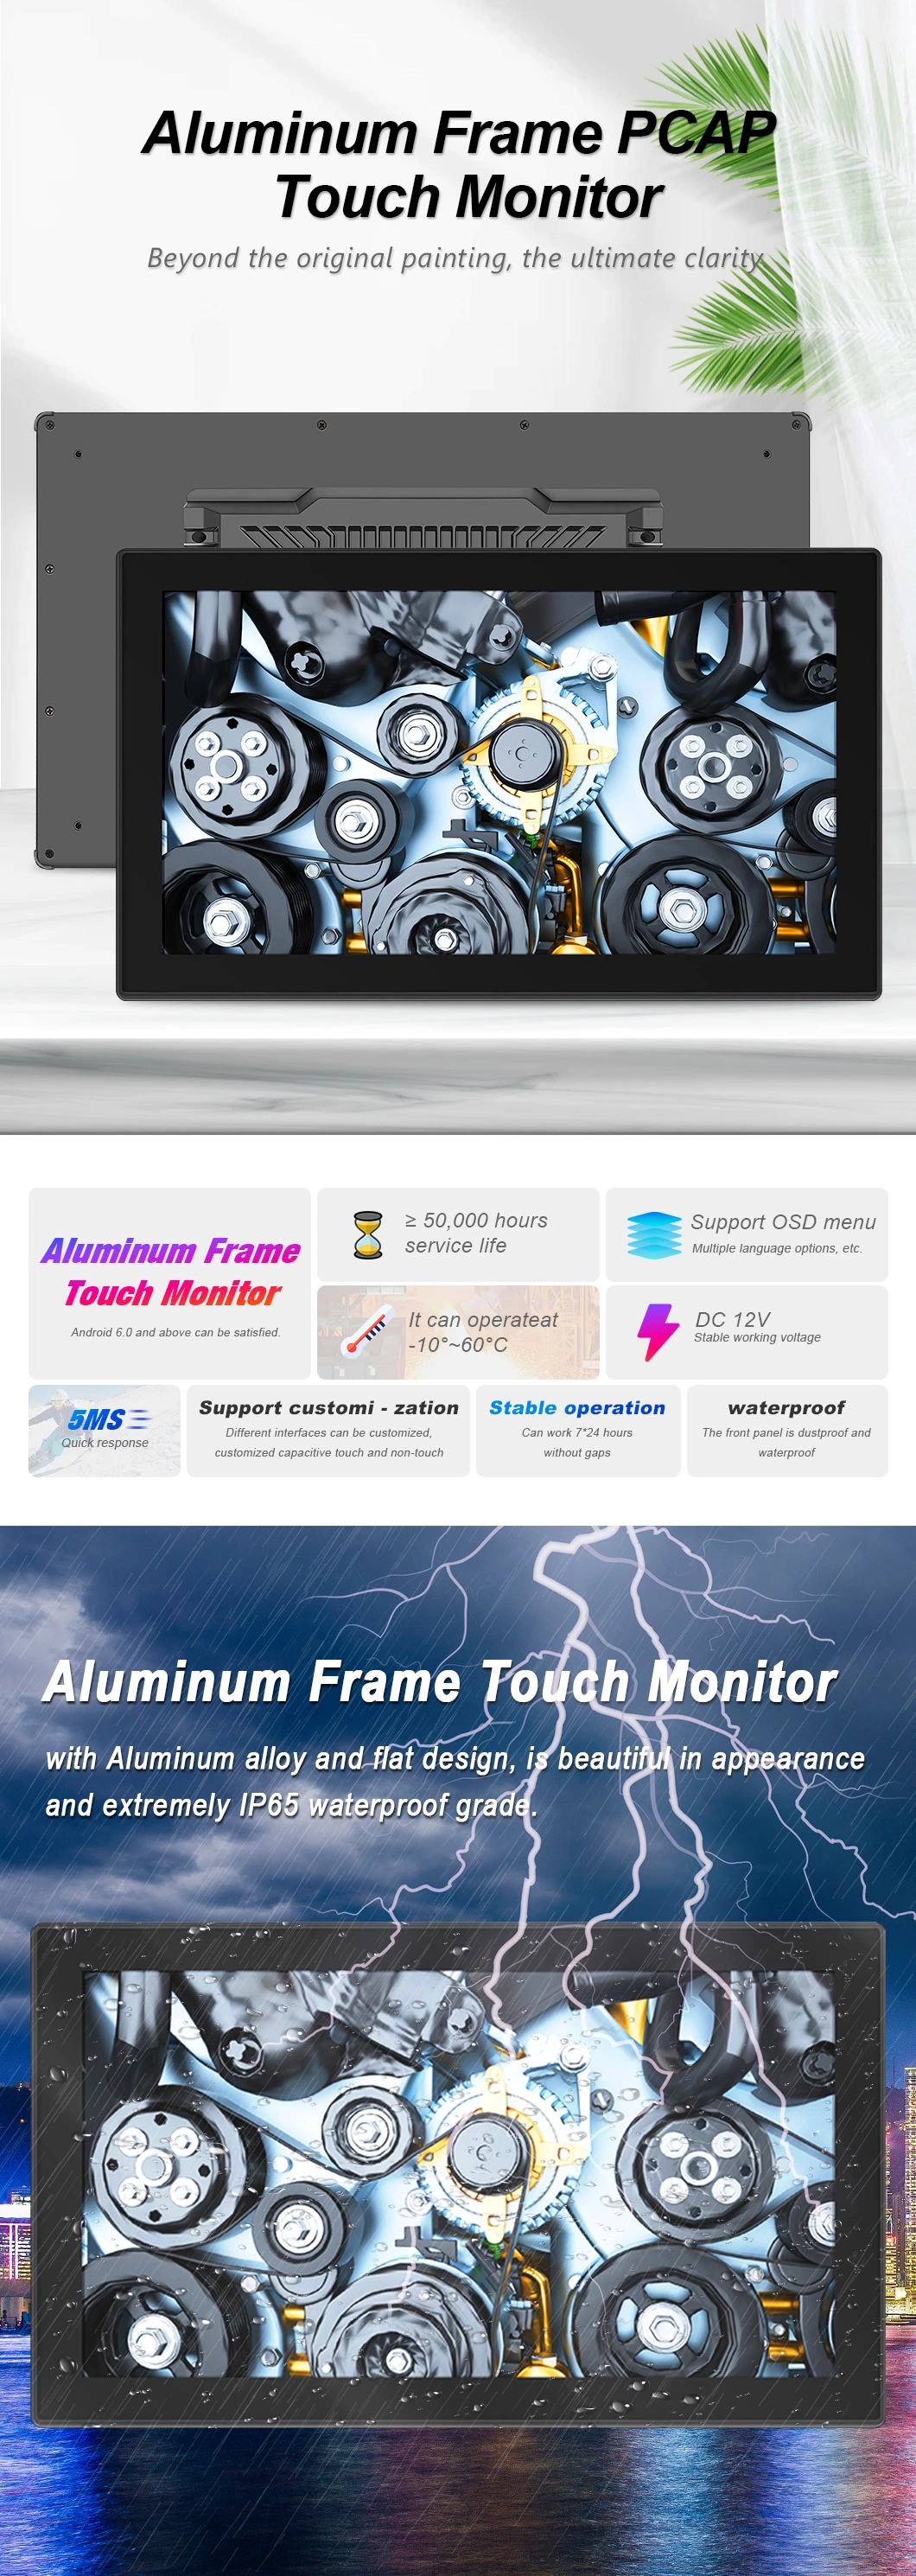 21.5 Inch TFT LCD Industrial Screen IPS VGA Capacitive Pcap Touchscreen Aluminum Frame Industrial LCD Monitor